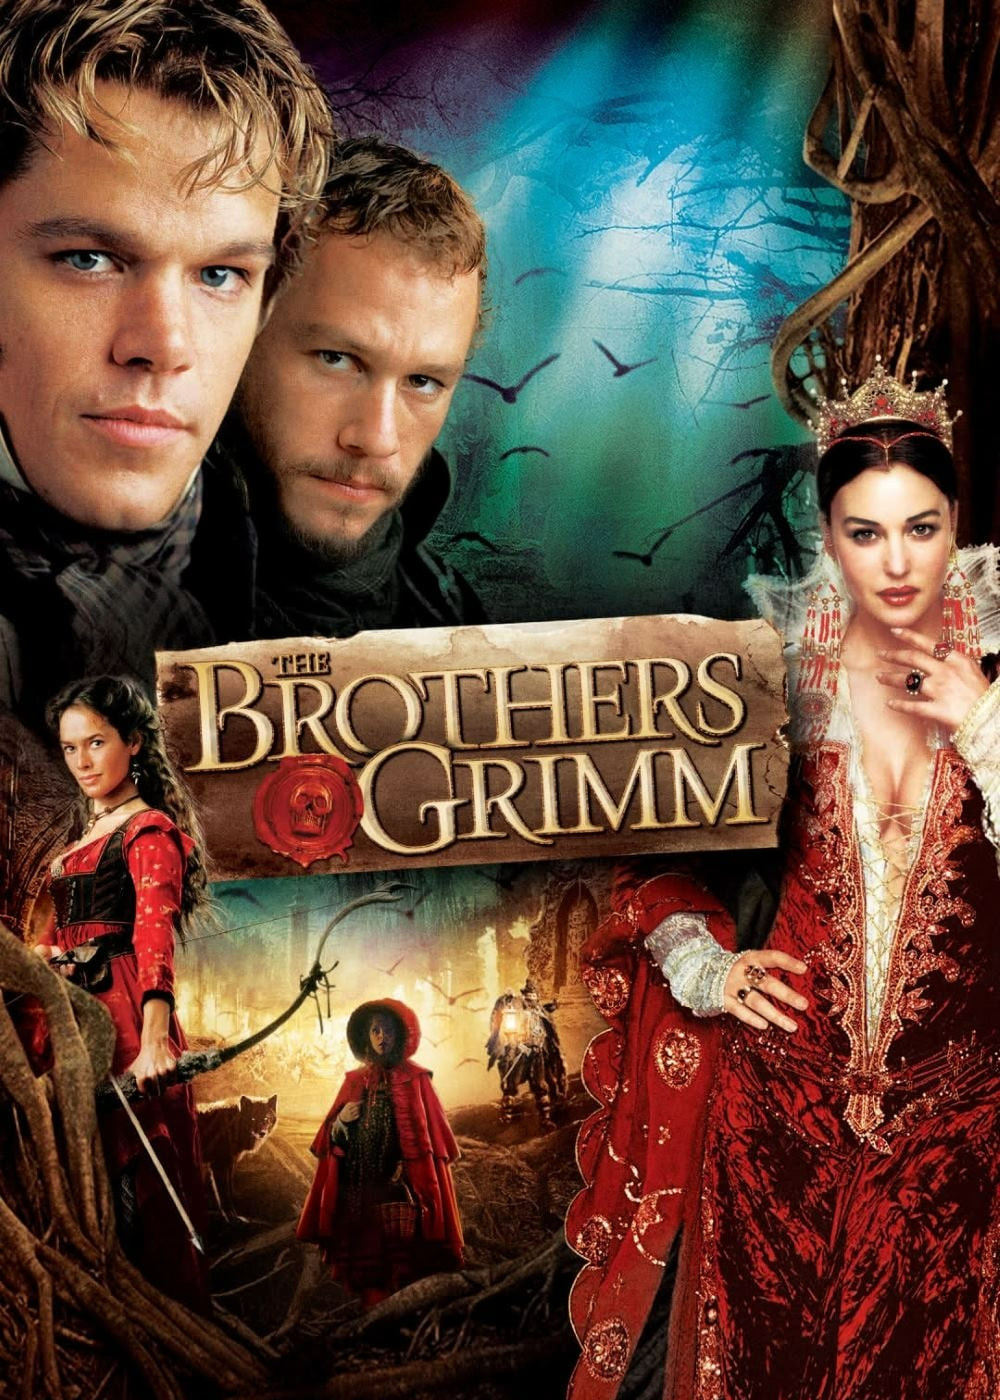 Poster Phim Anh Em Nhà Grimm (The Brothers Grimm)